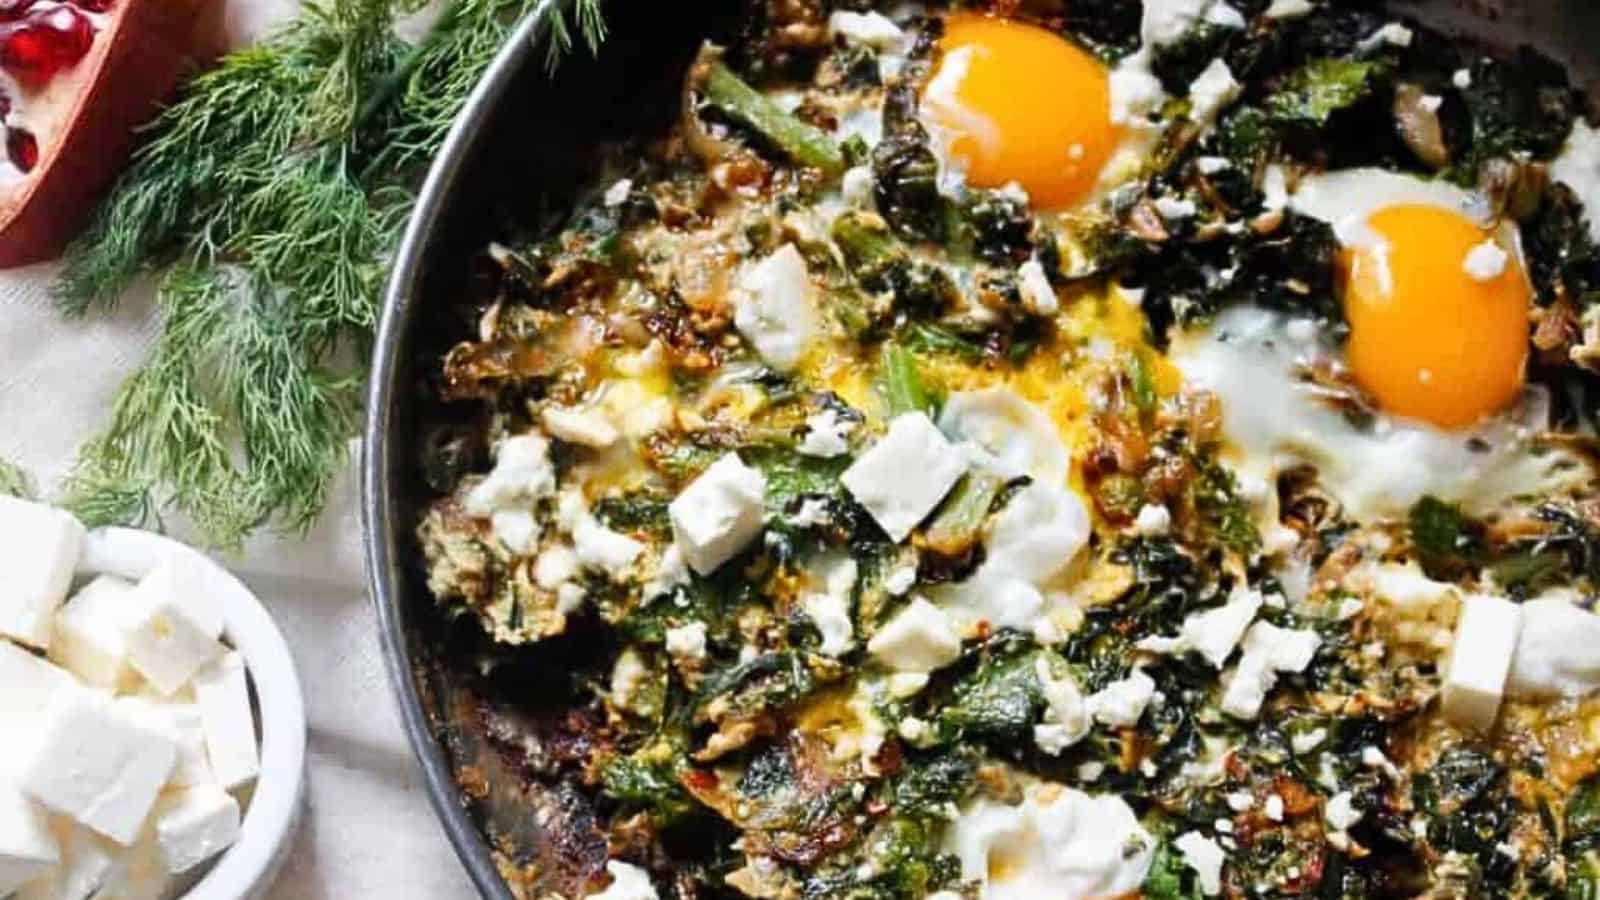 A skillet with eggs, spinach and pomegranate.